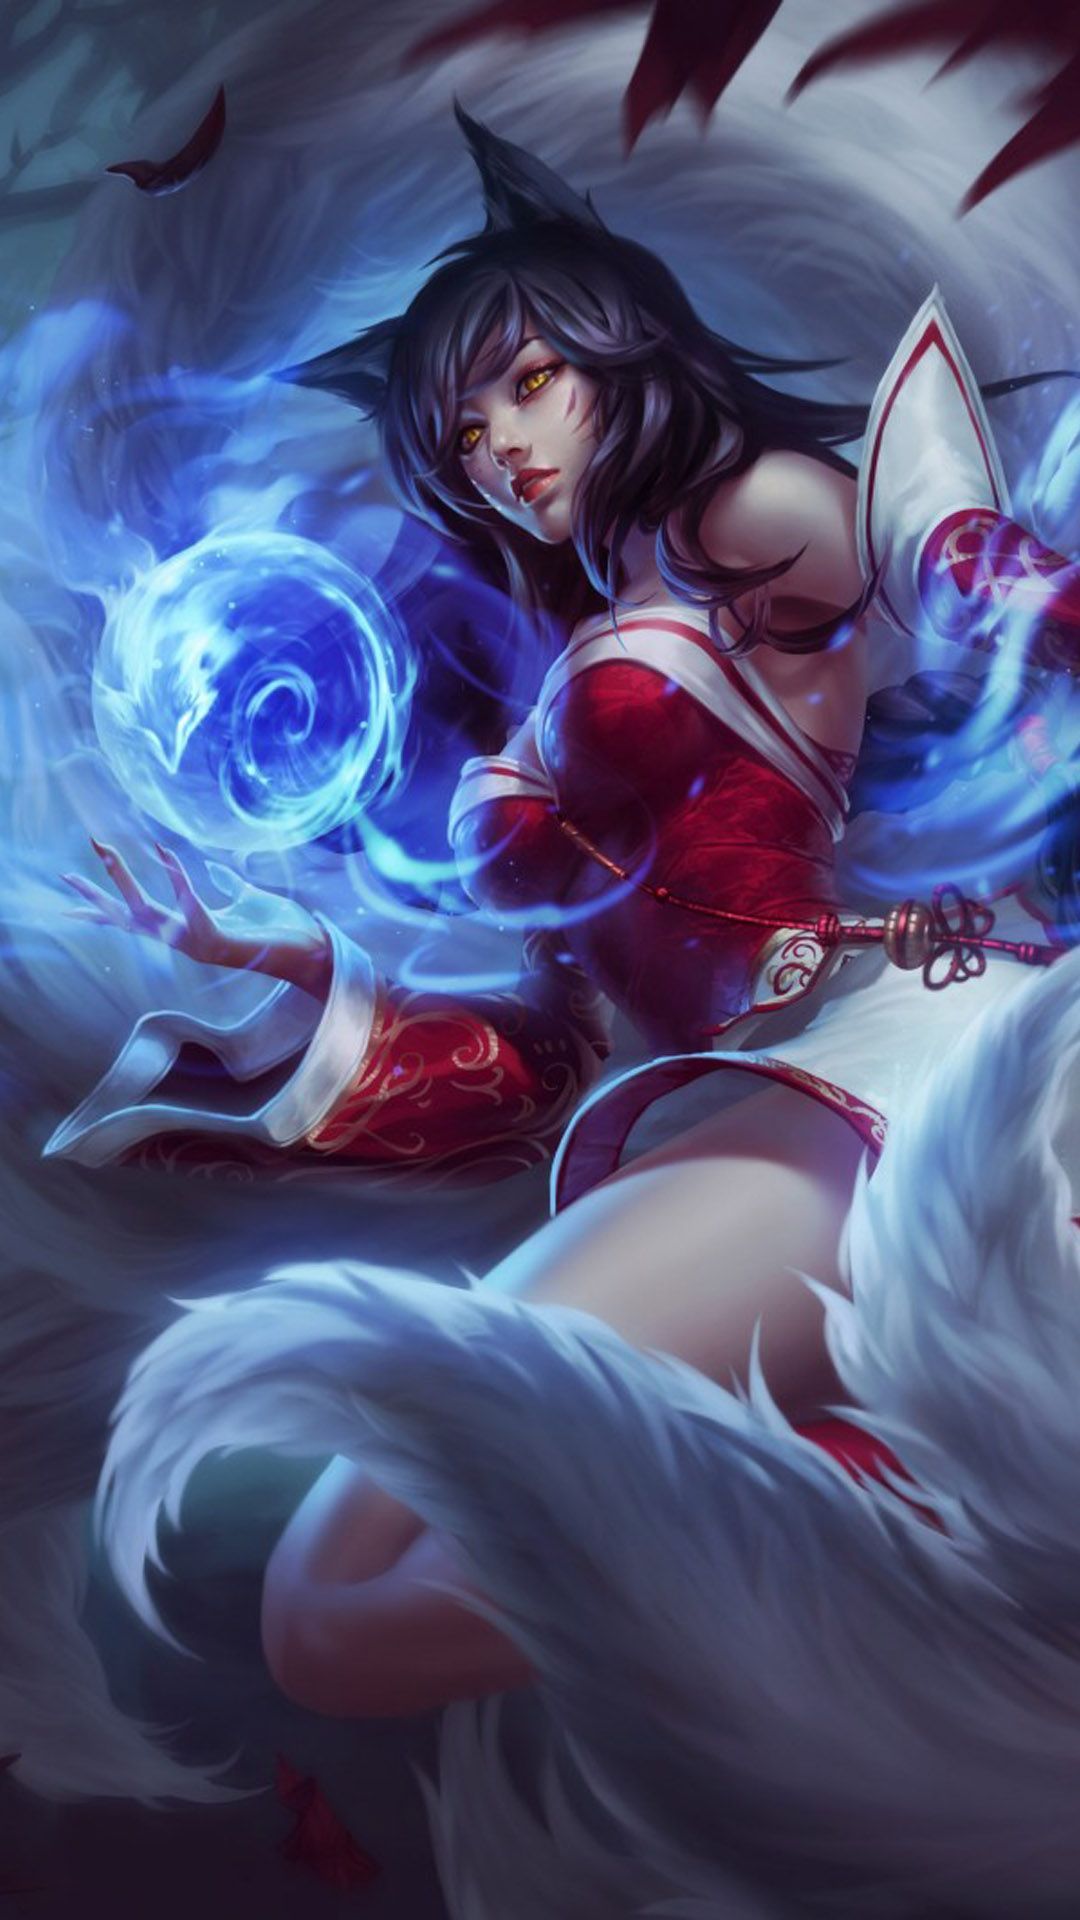 Download Ahri League of Legends Free Pure 4K Ultra HD Mobile Wallpaper. Champions league of legends, Lol league of legends, Ahri league